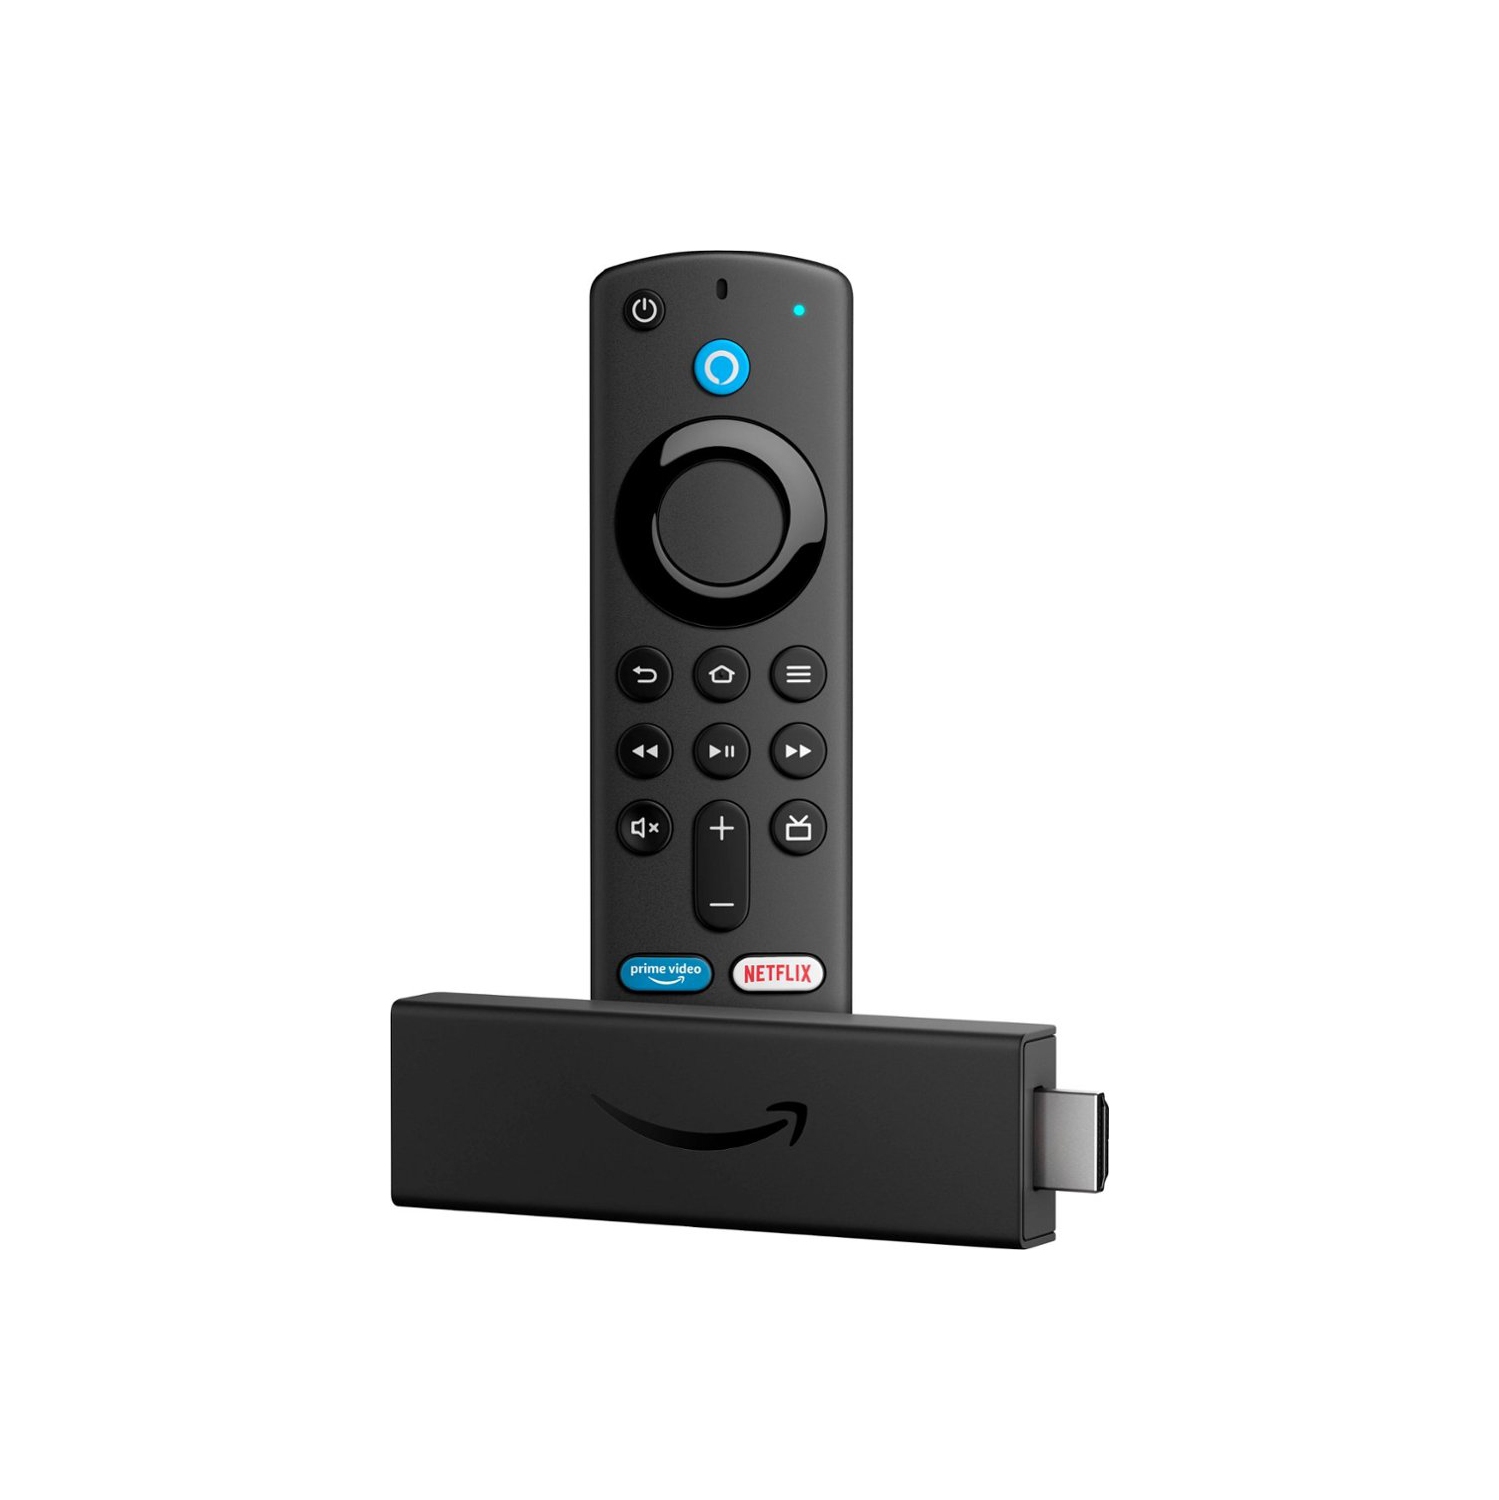 Amazon Fire TV Stick 4K (3rd Gen) With Alexa Voice Remote Streaming Media Player - Black - Brand New